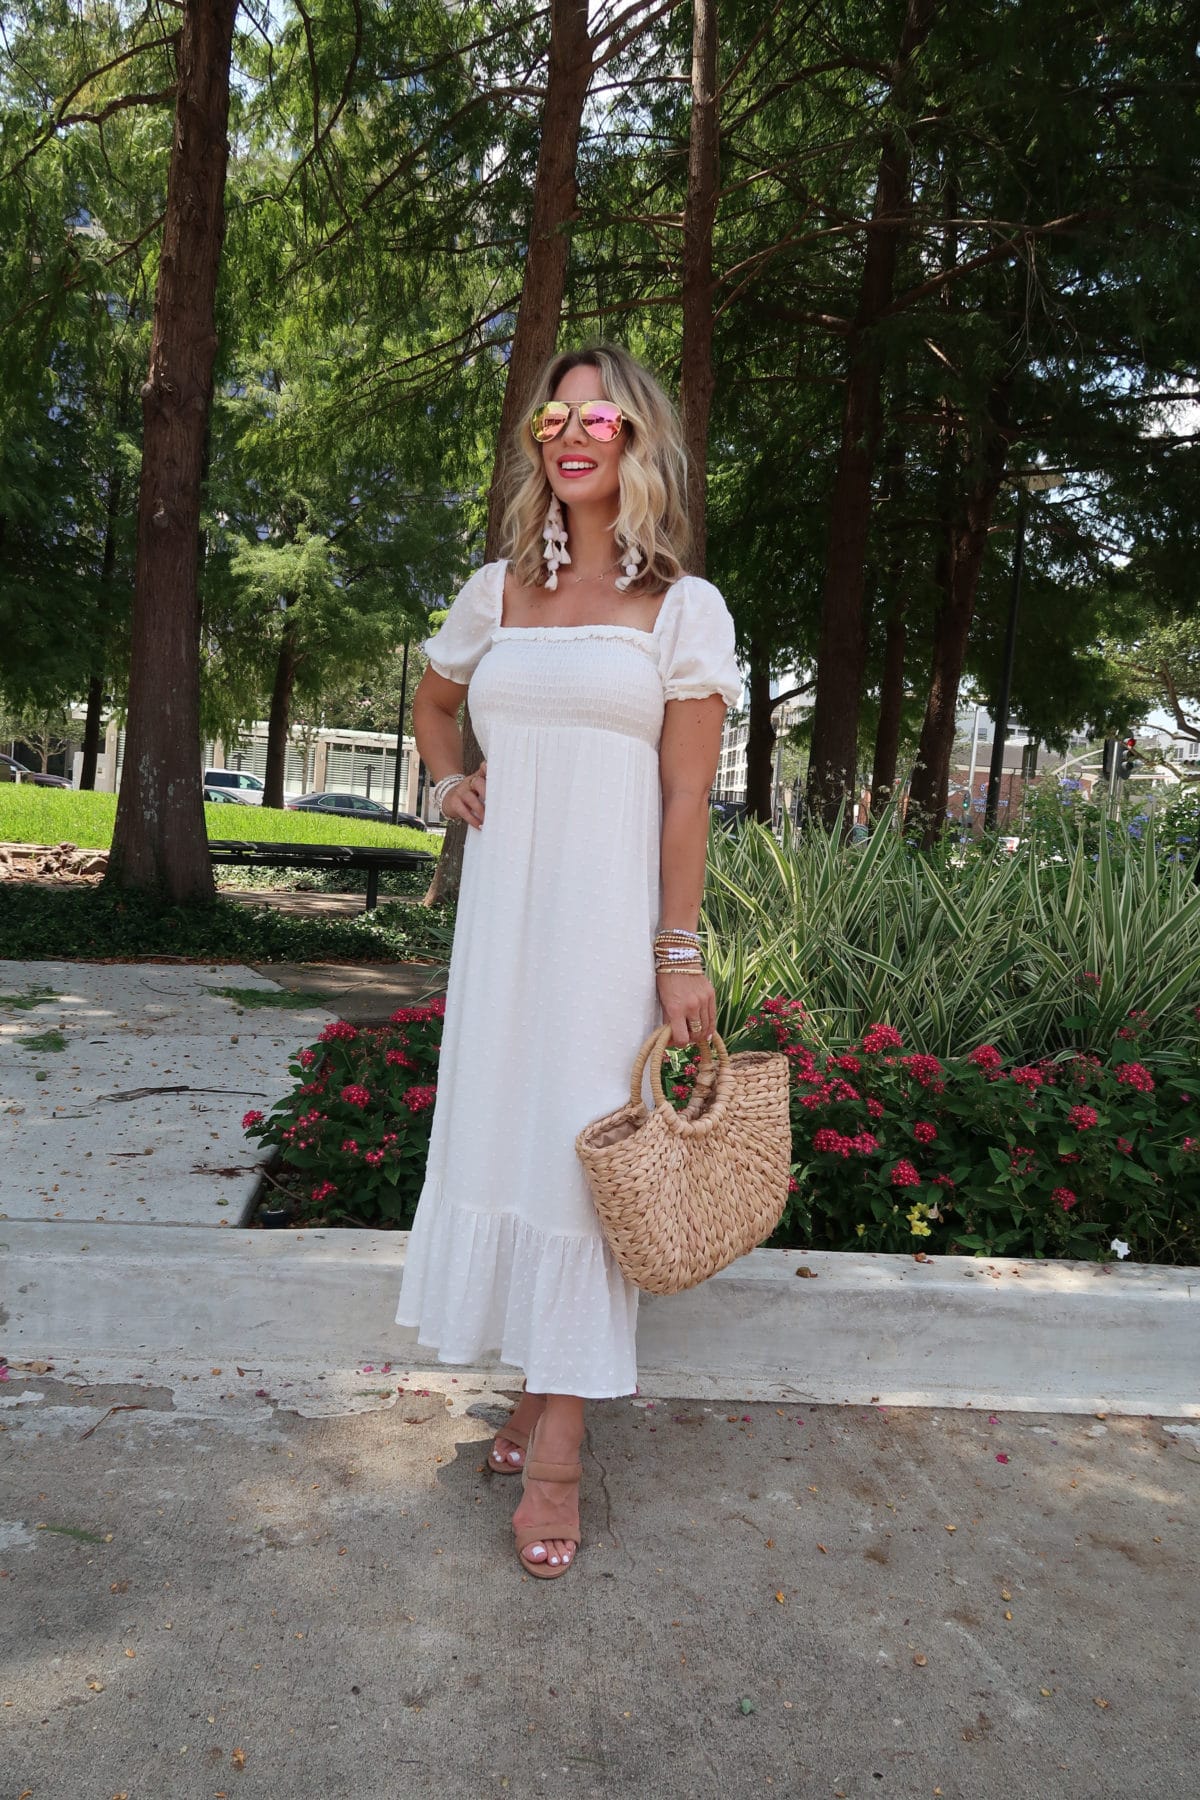 New Summer Styles, Gibson and Nordstrom, White Clip Dot Dress, Sandals, Woven Bag 